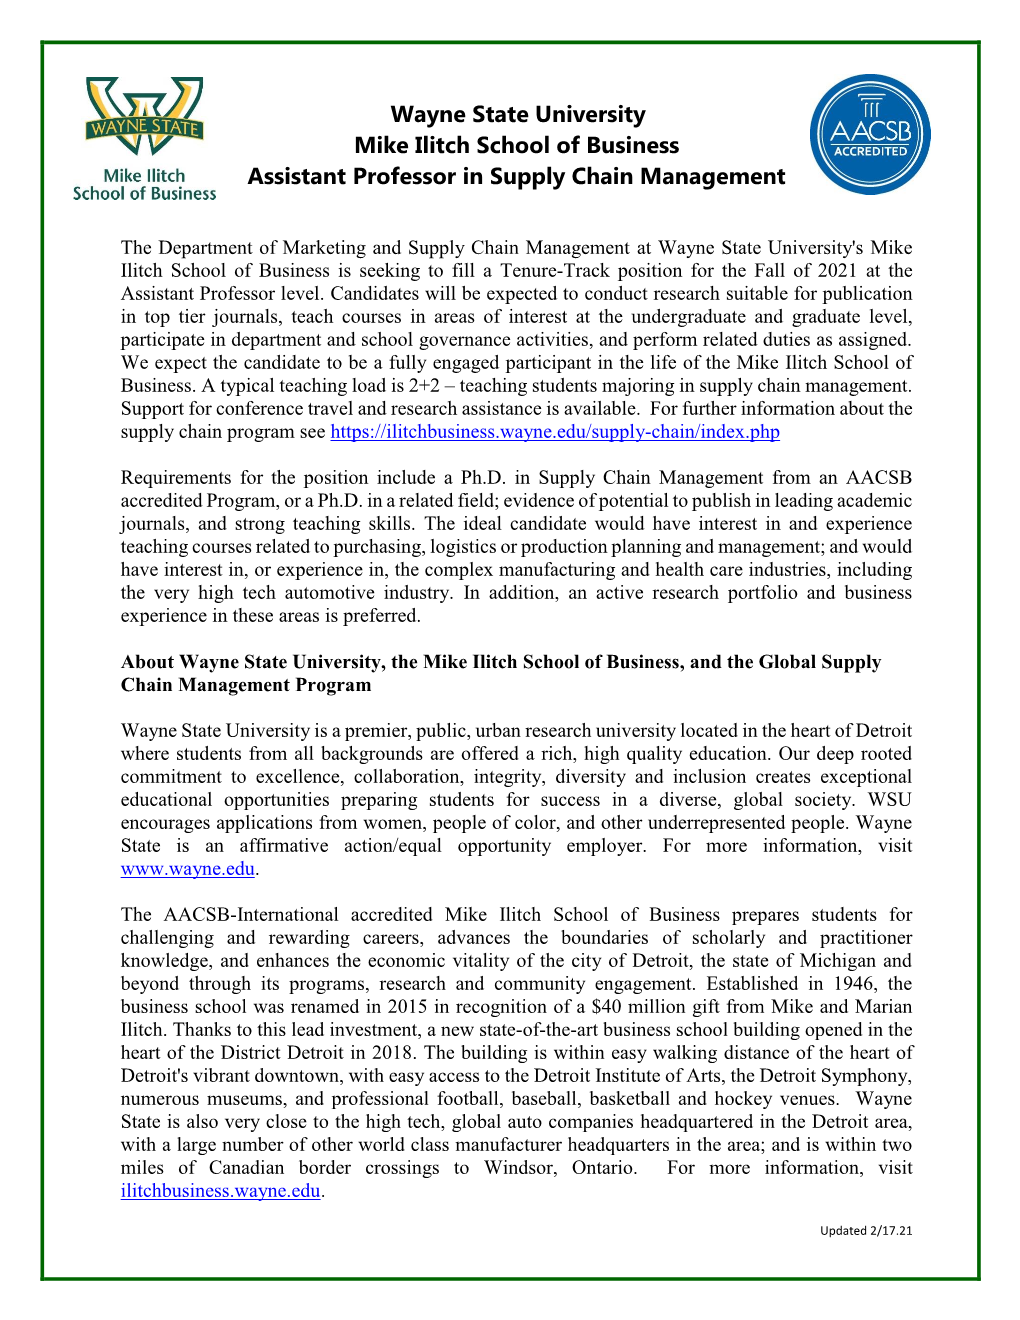 11. Assistant Professor in Supply Chain Management, Wayne State